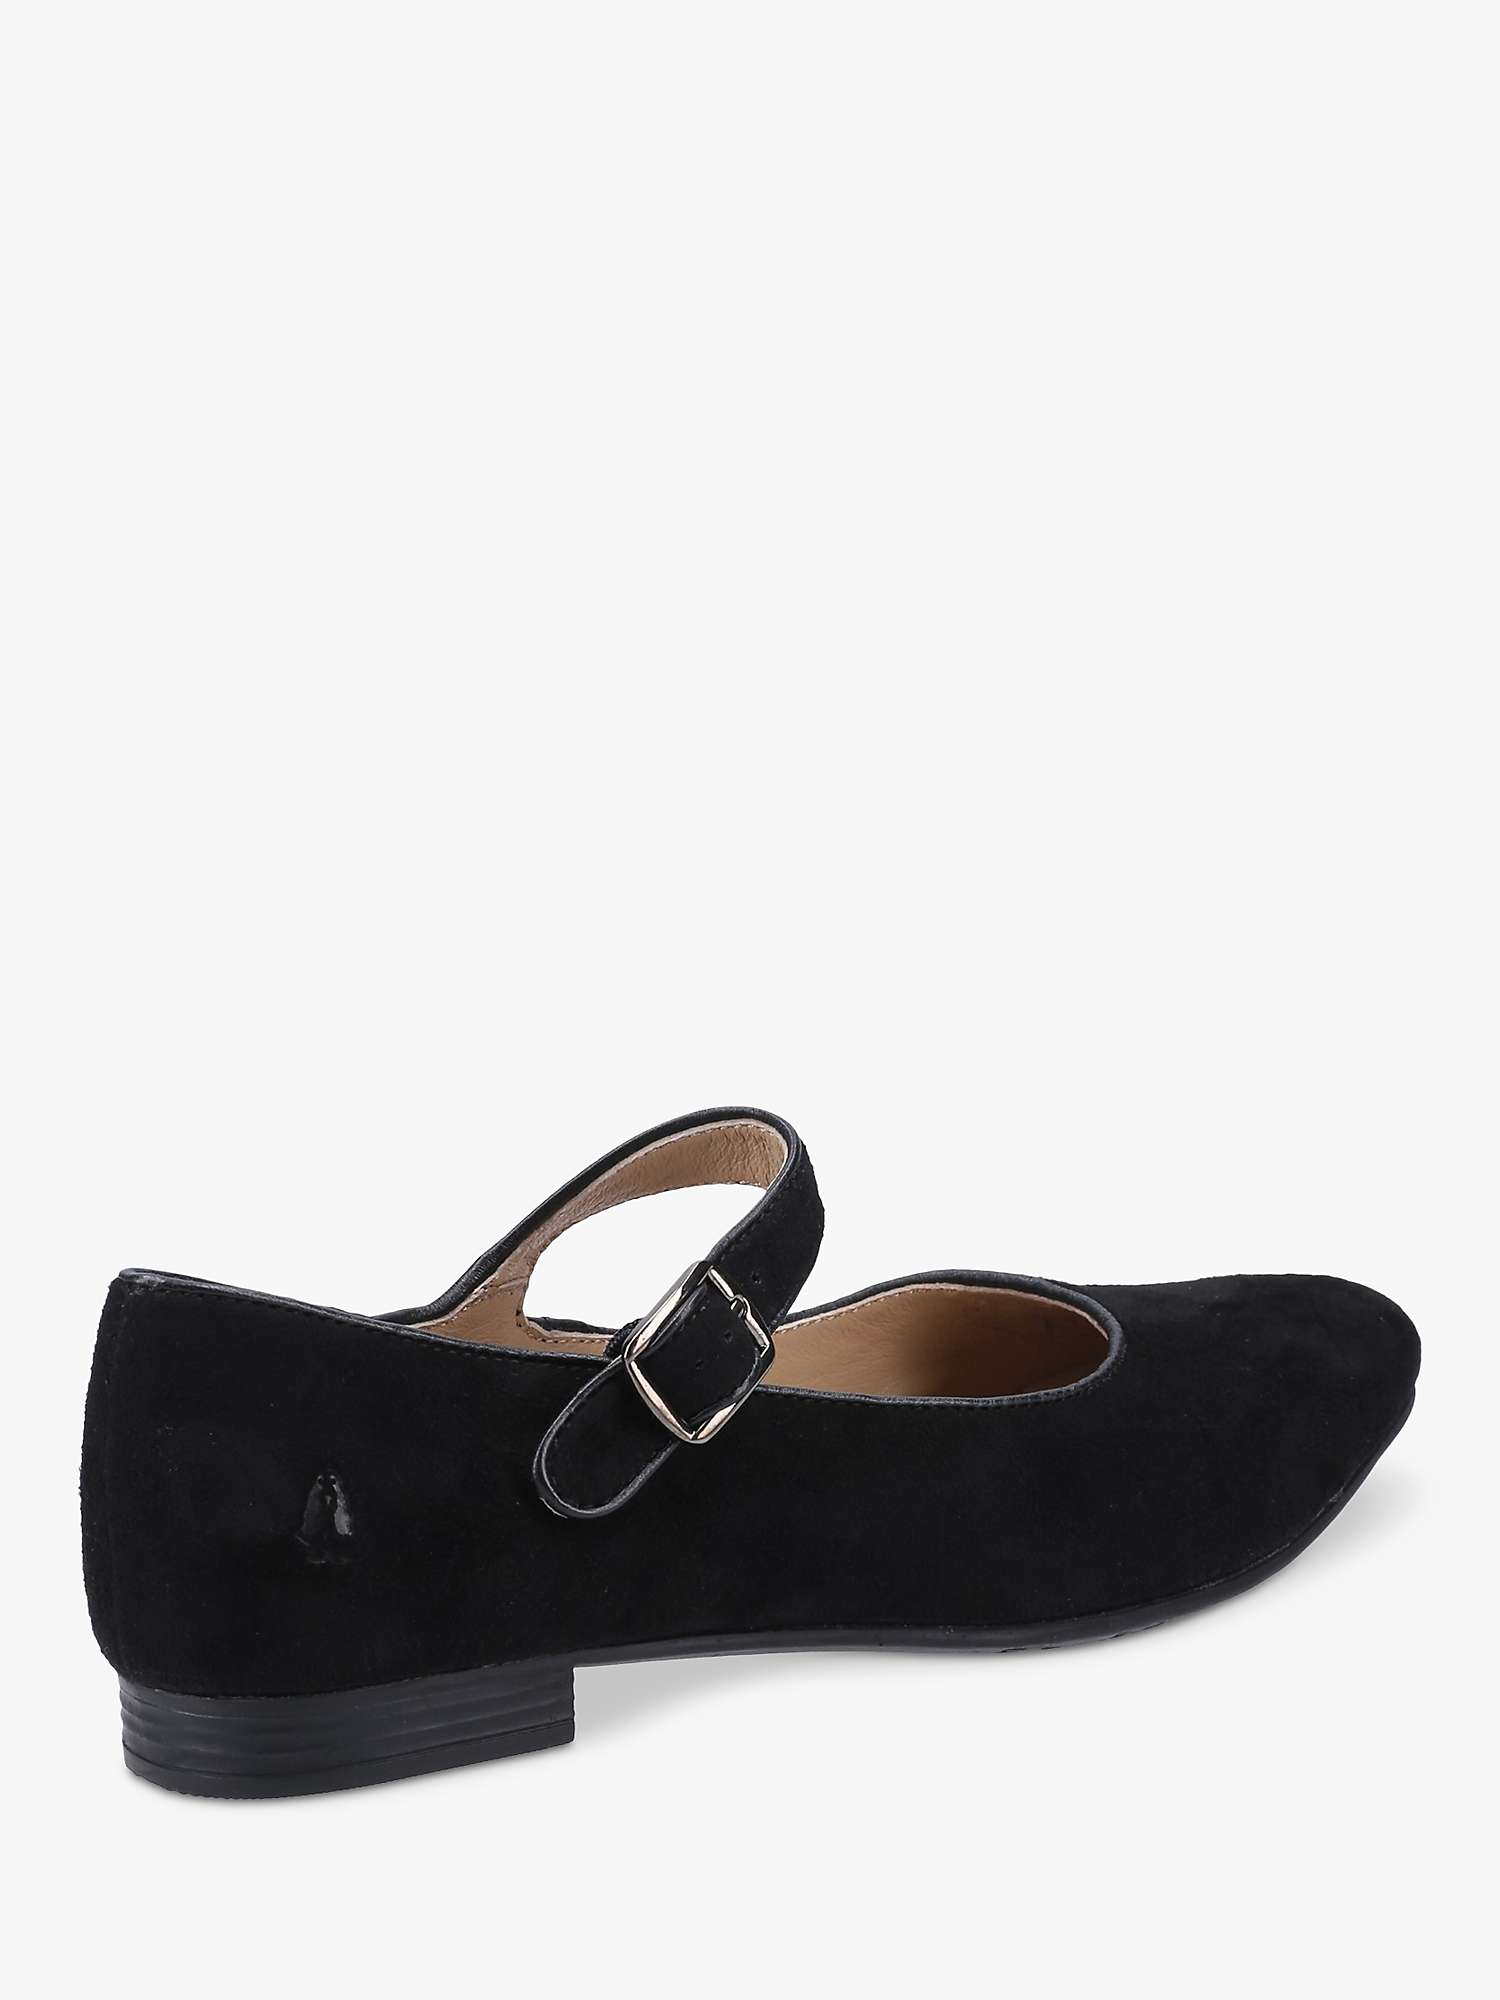 Buy Melissa Suede Strap Mary Jane Shoes, Black Online at johnlewis.com